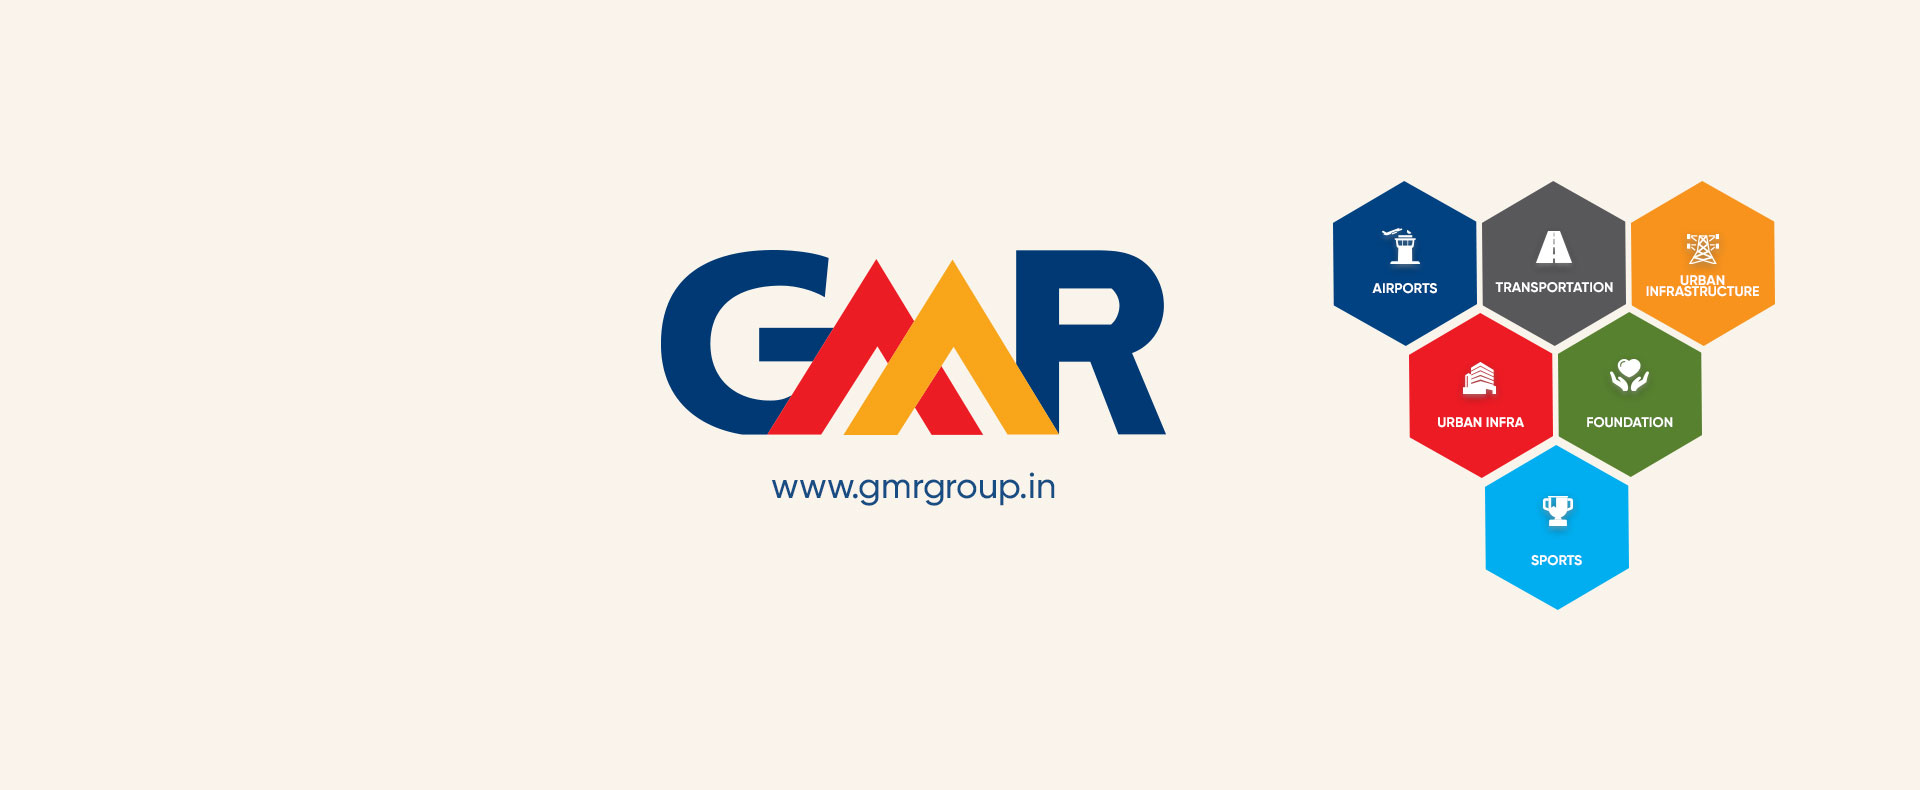 gmr group |infrastructure organisation